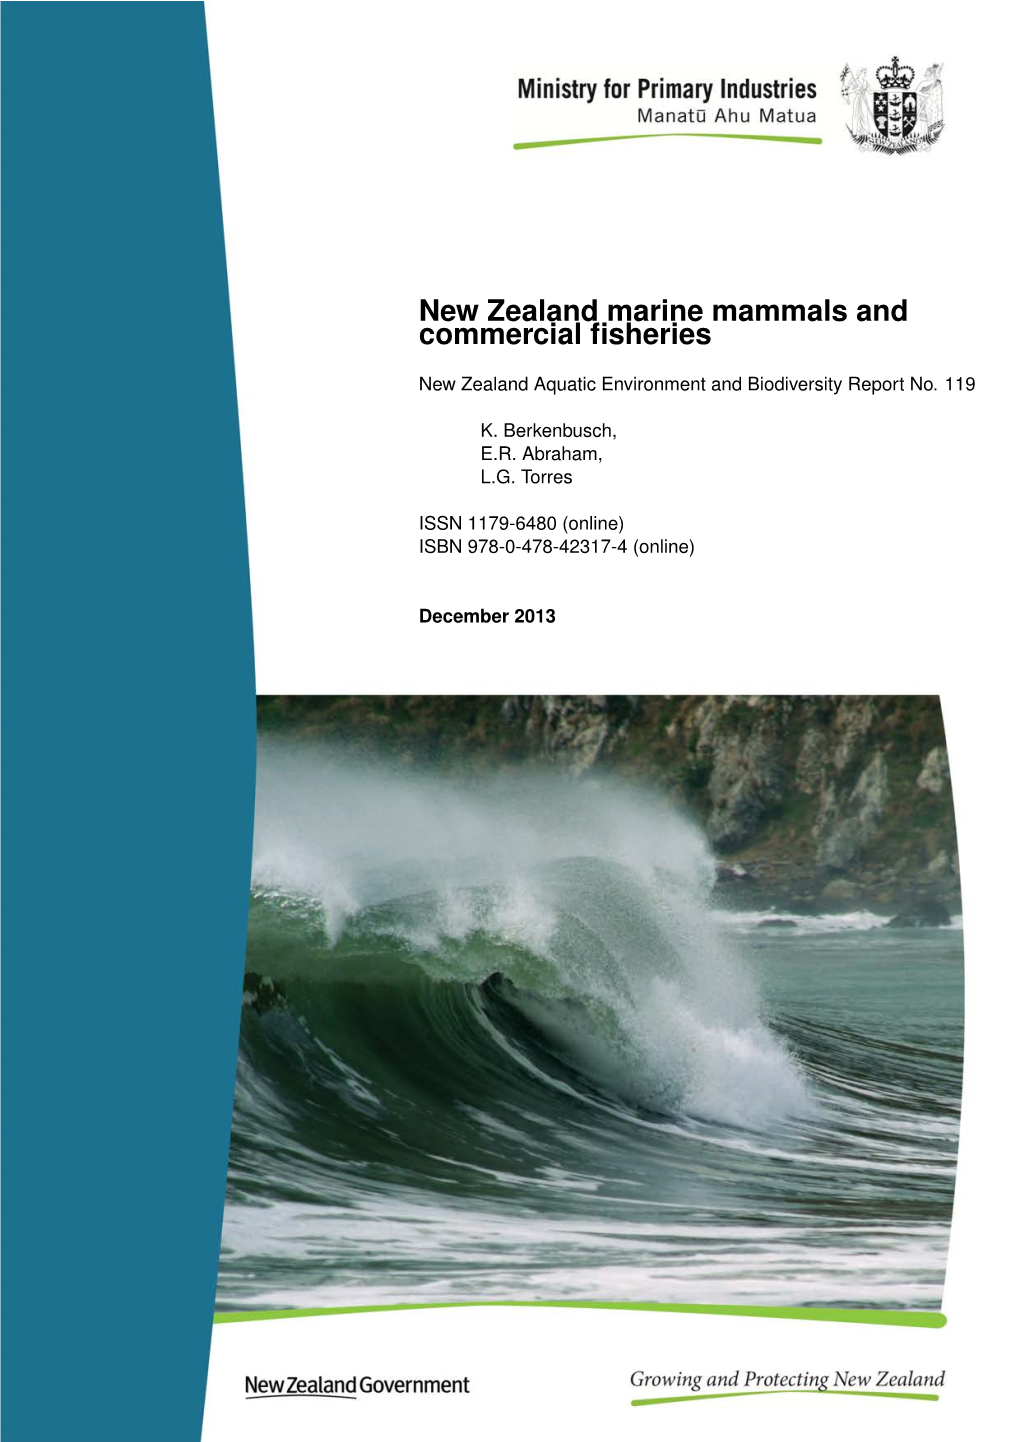 New Zealand Marine Mammals and Commercial Fisheries